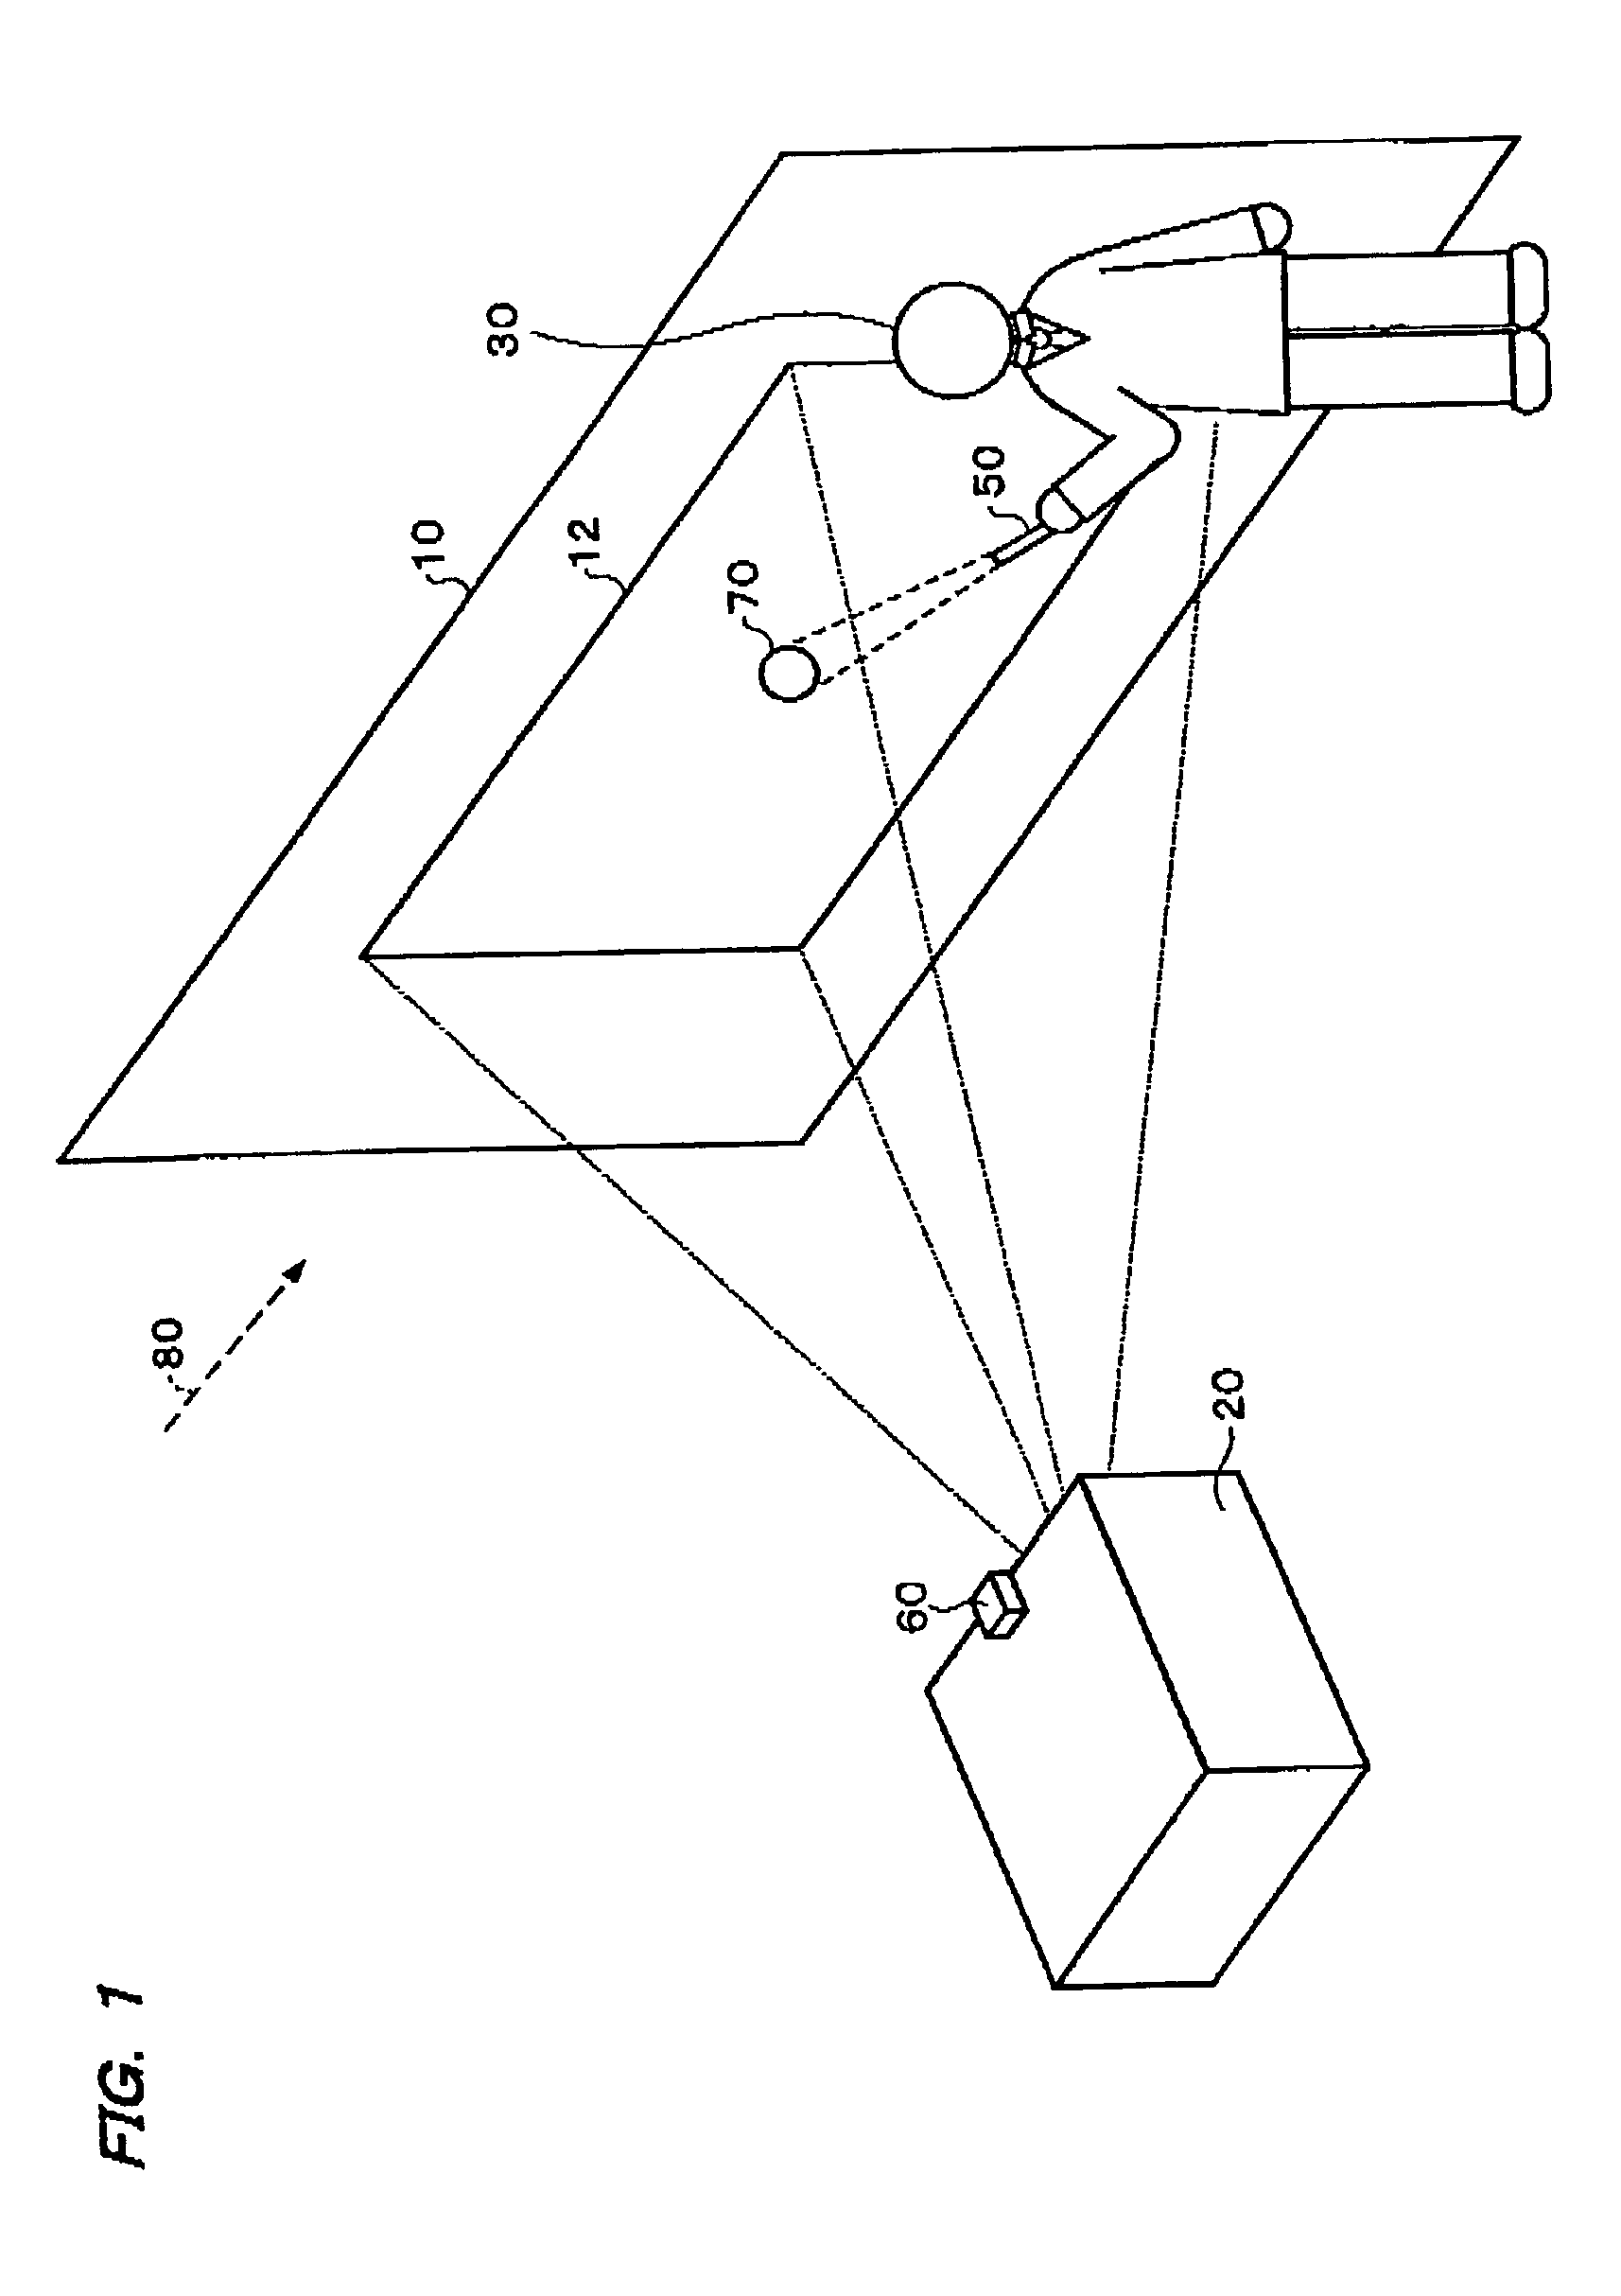 Environment-compliant image display system and image processing method